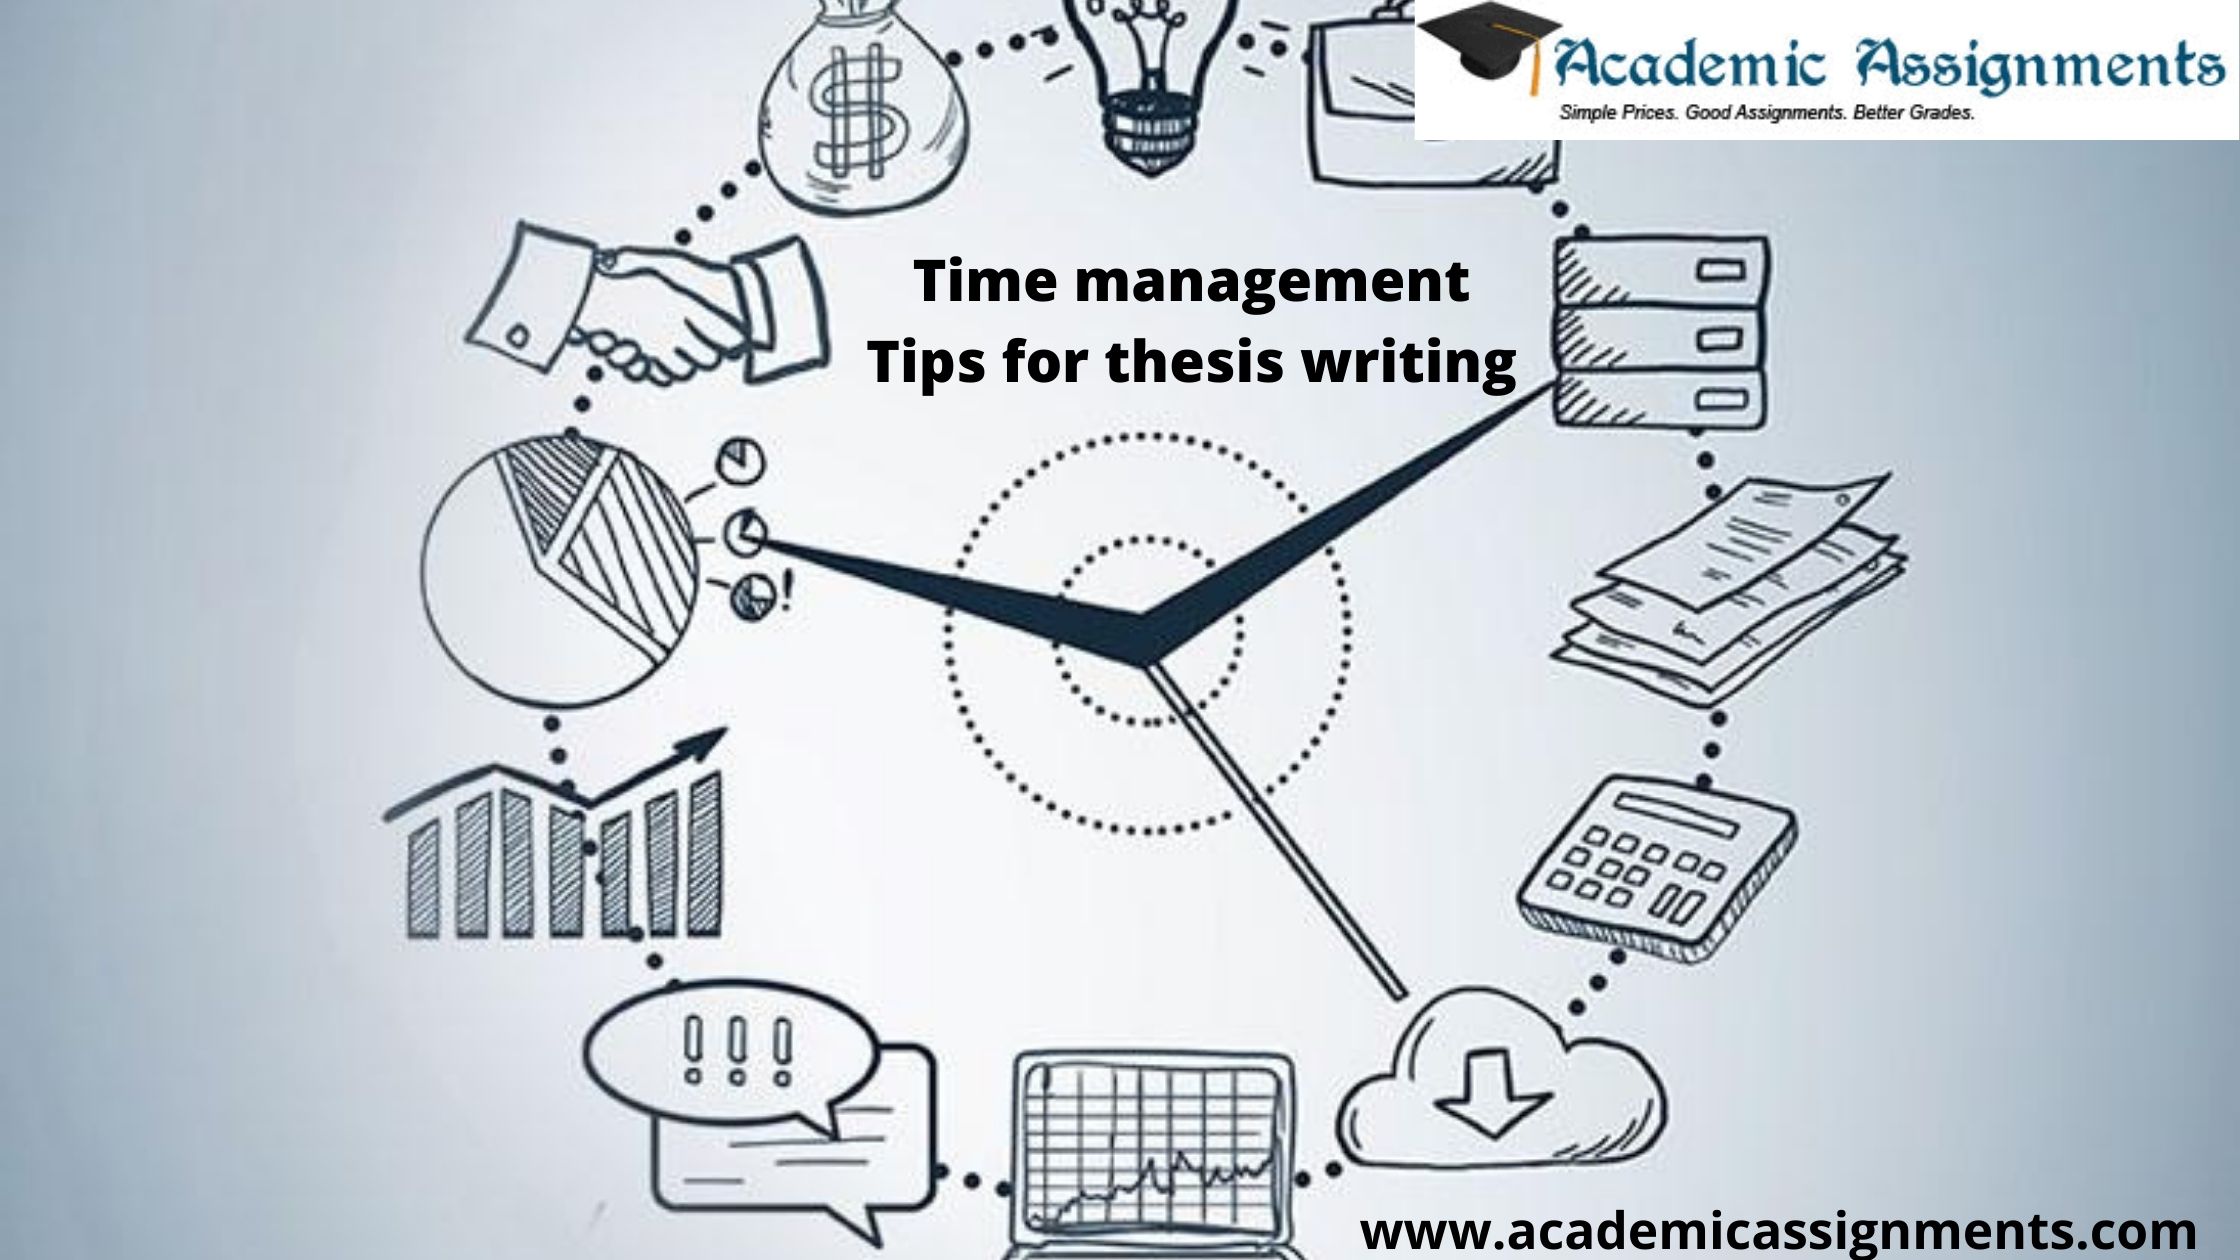 Time management Tips for thesis writing